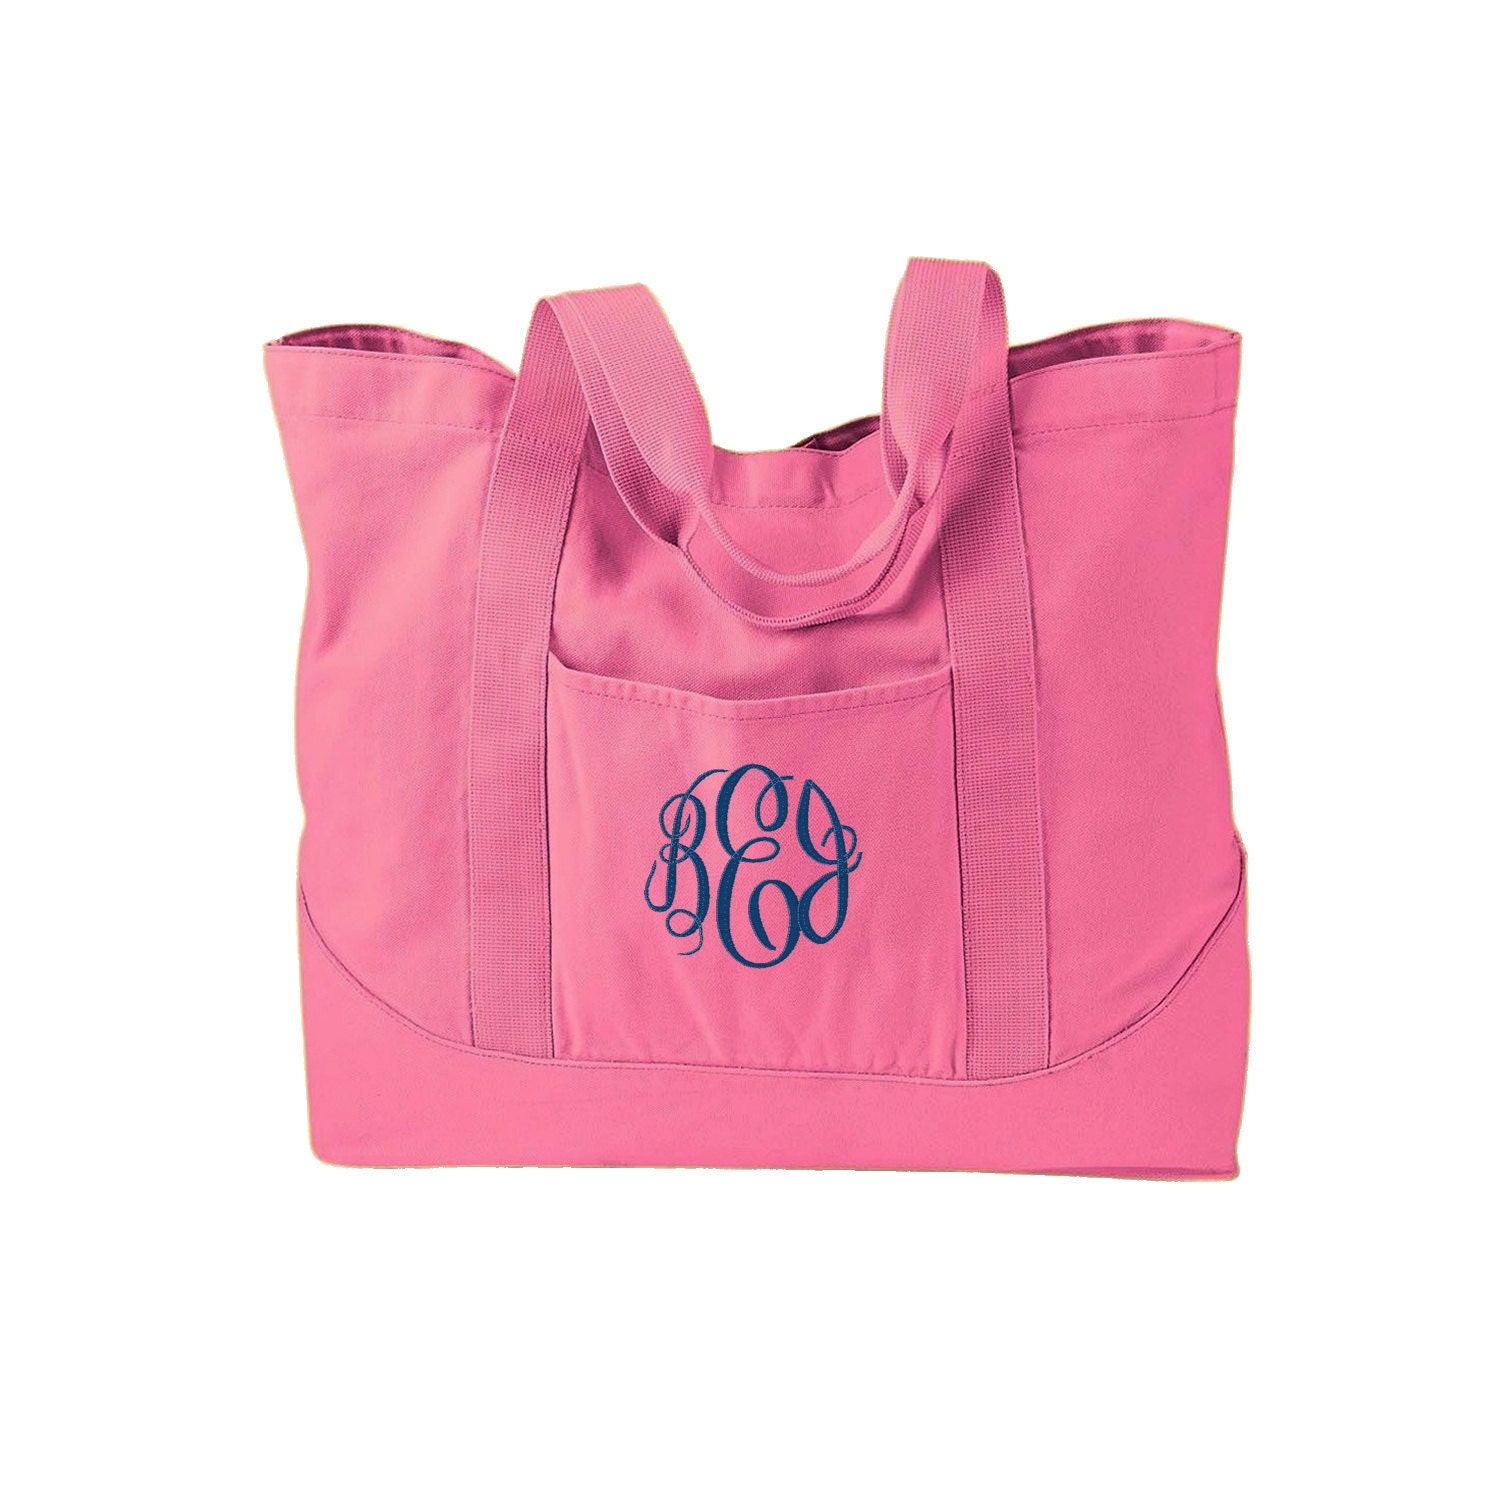 Monogrammed Tote Bag Personalized Canvas Tote Bag in 7